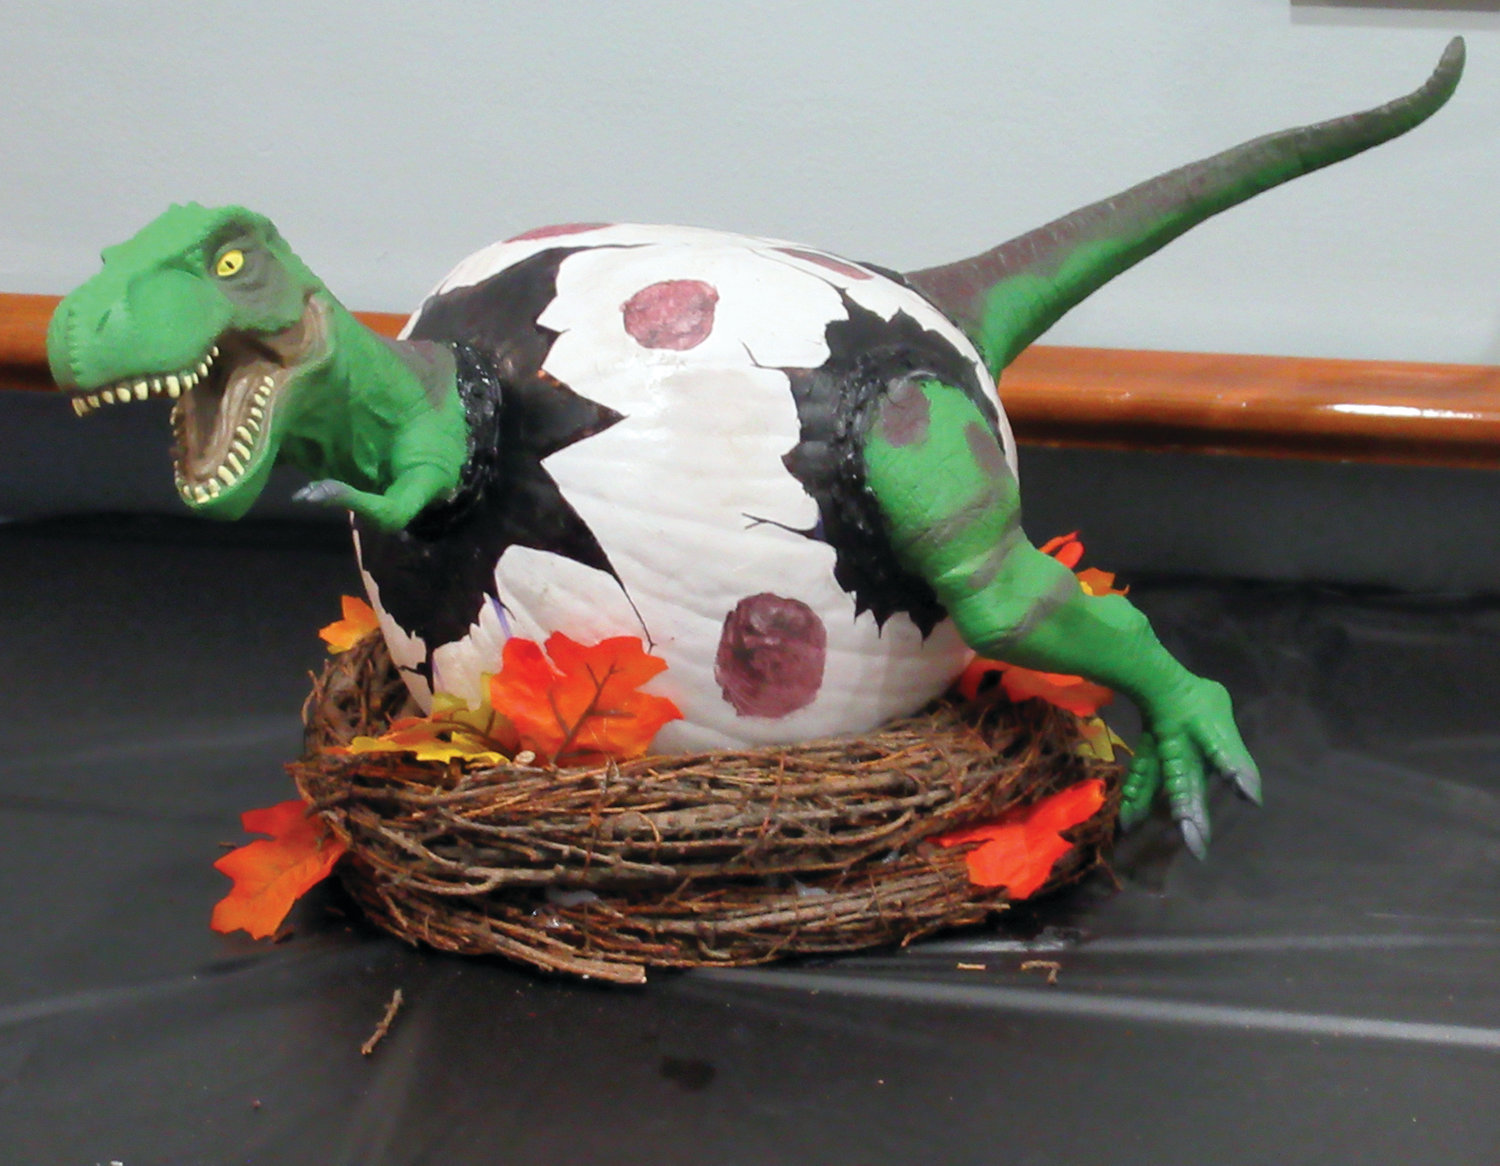 This is the colorful and creative dinosaur pumpkin that took first place in Saturday’s Employee Appreciation Halloween Party contest.